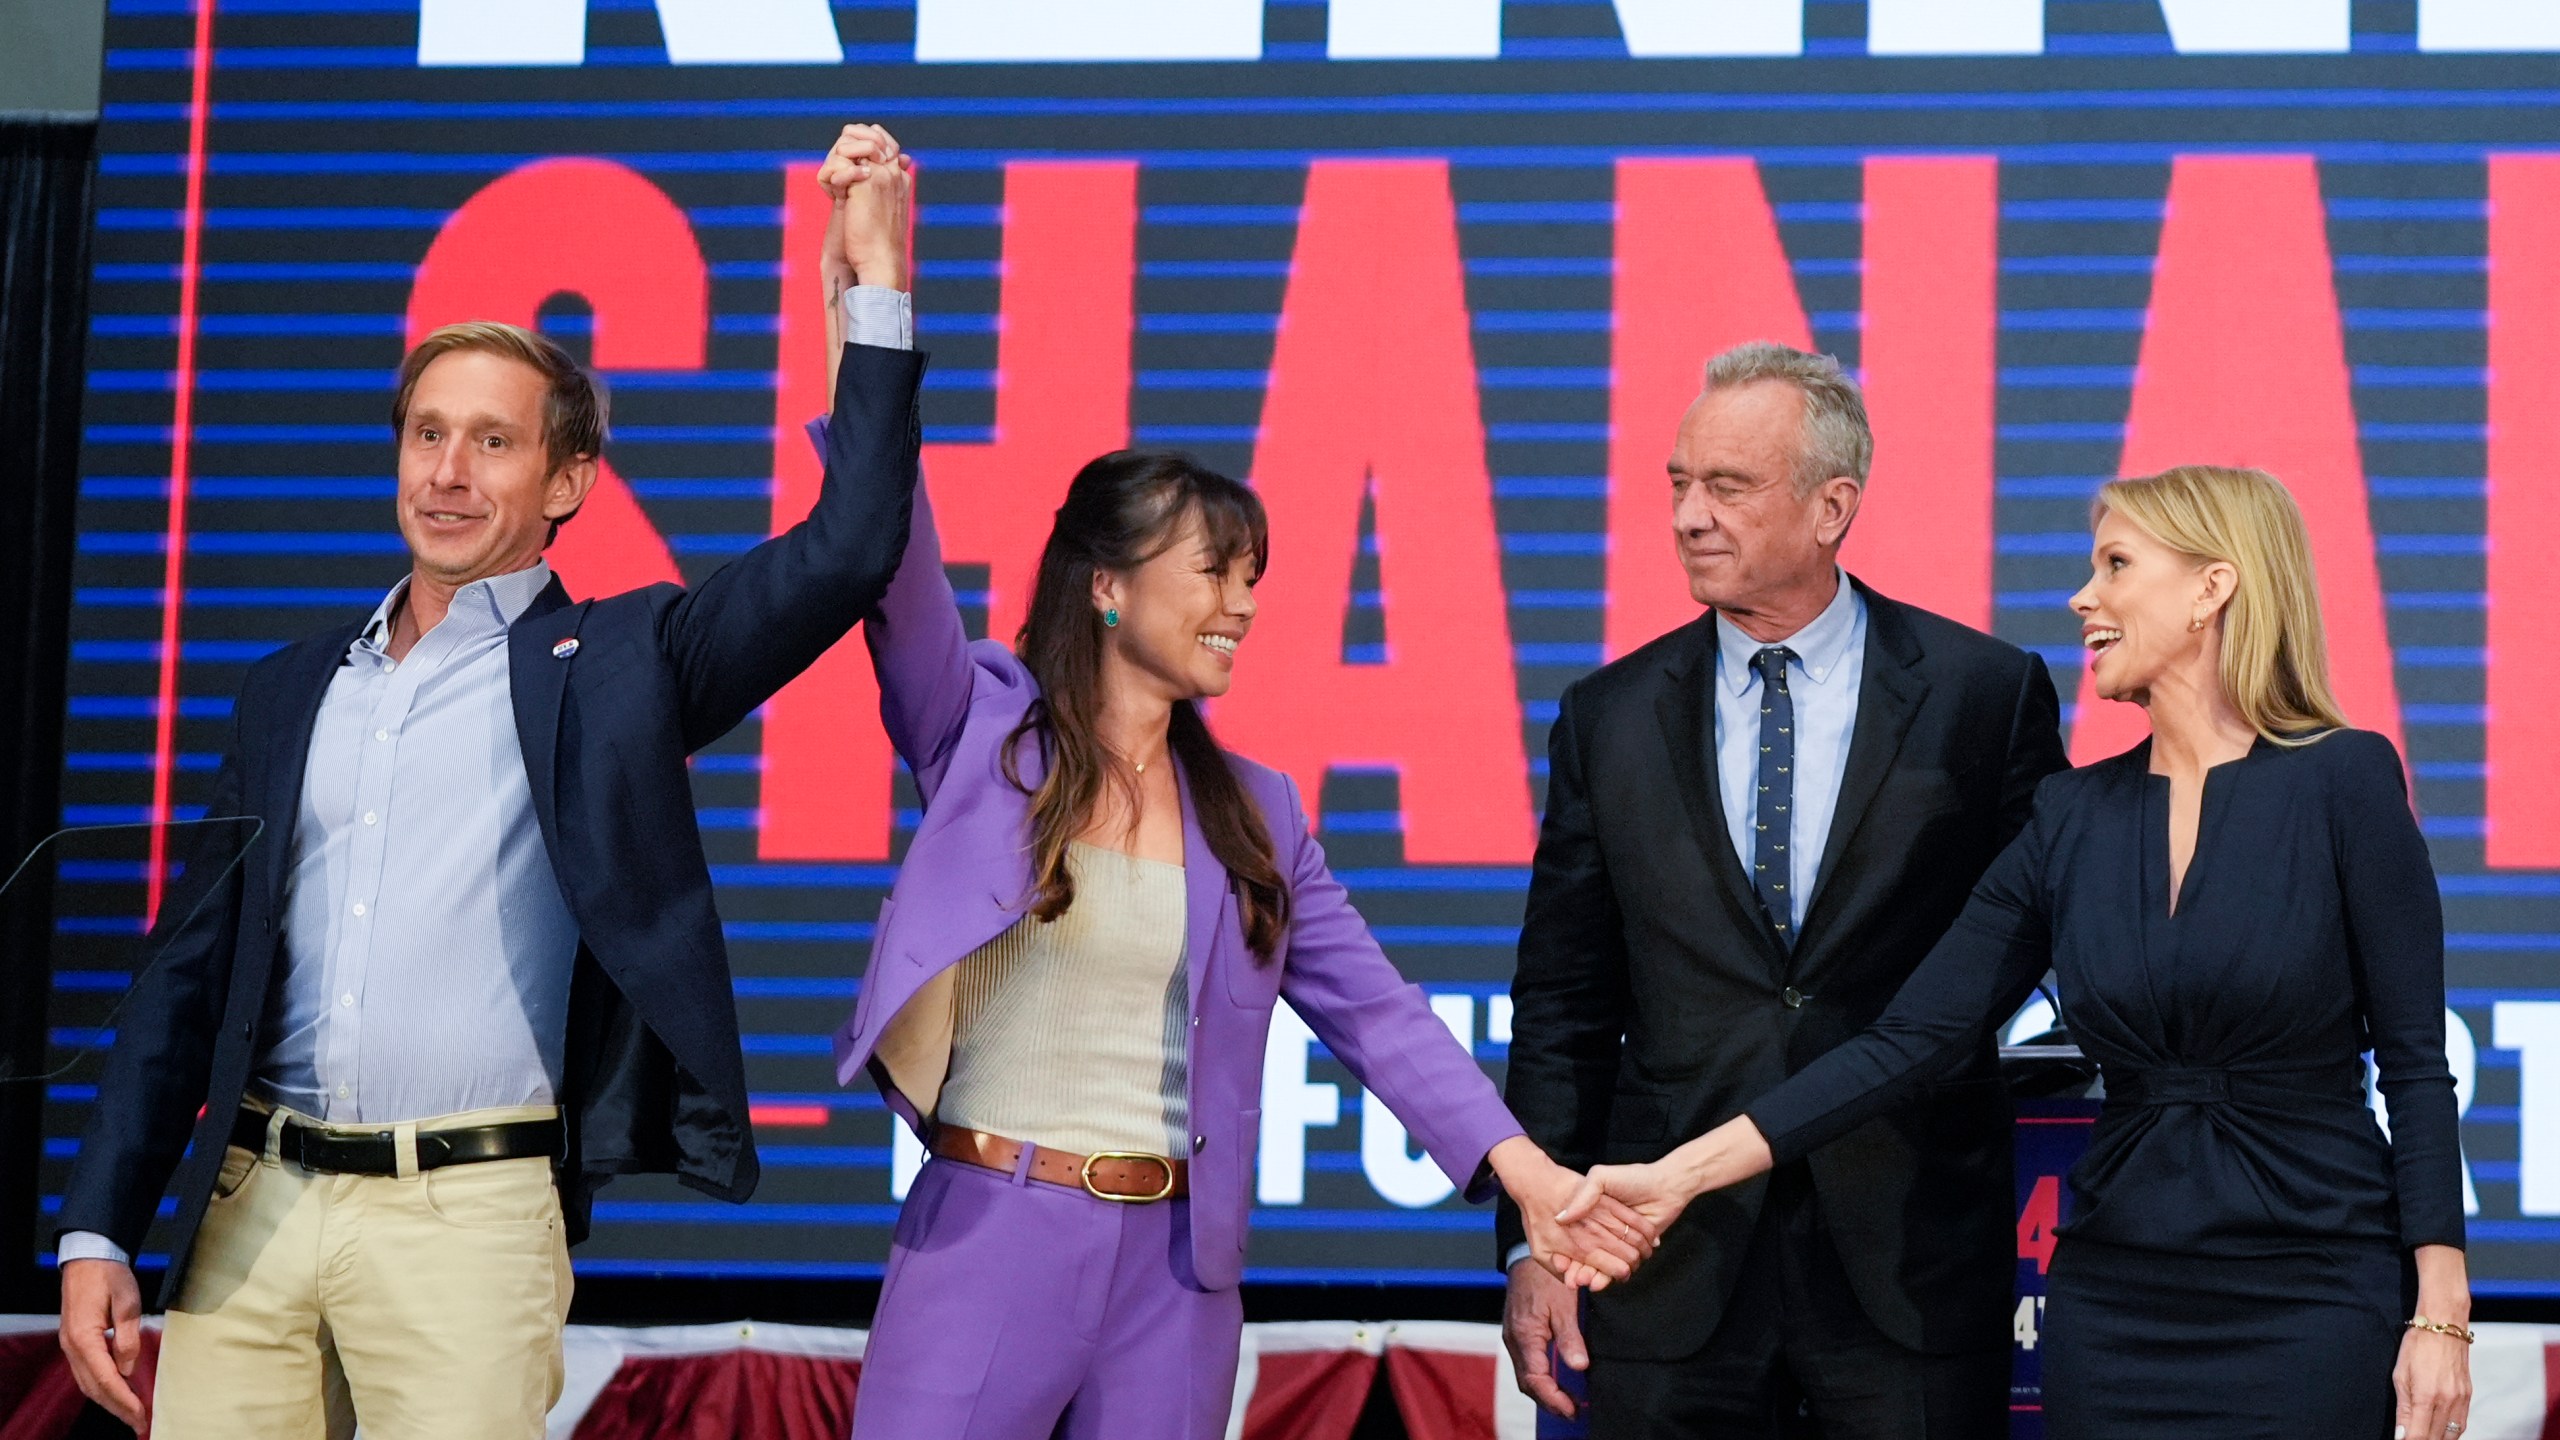 From left, to right, Jacob Strumwasser, Nicole Shanahan, Presidential candidate Robert F. Kennedy Jr. and Cheryl Hines stand together on stage during a campaign event, Tuesday, March 26, 2024, in Oakland, Calif. (AP Photo/Eric Risberg)